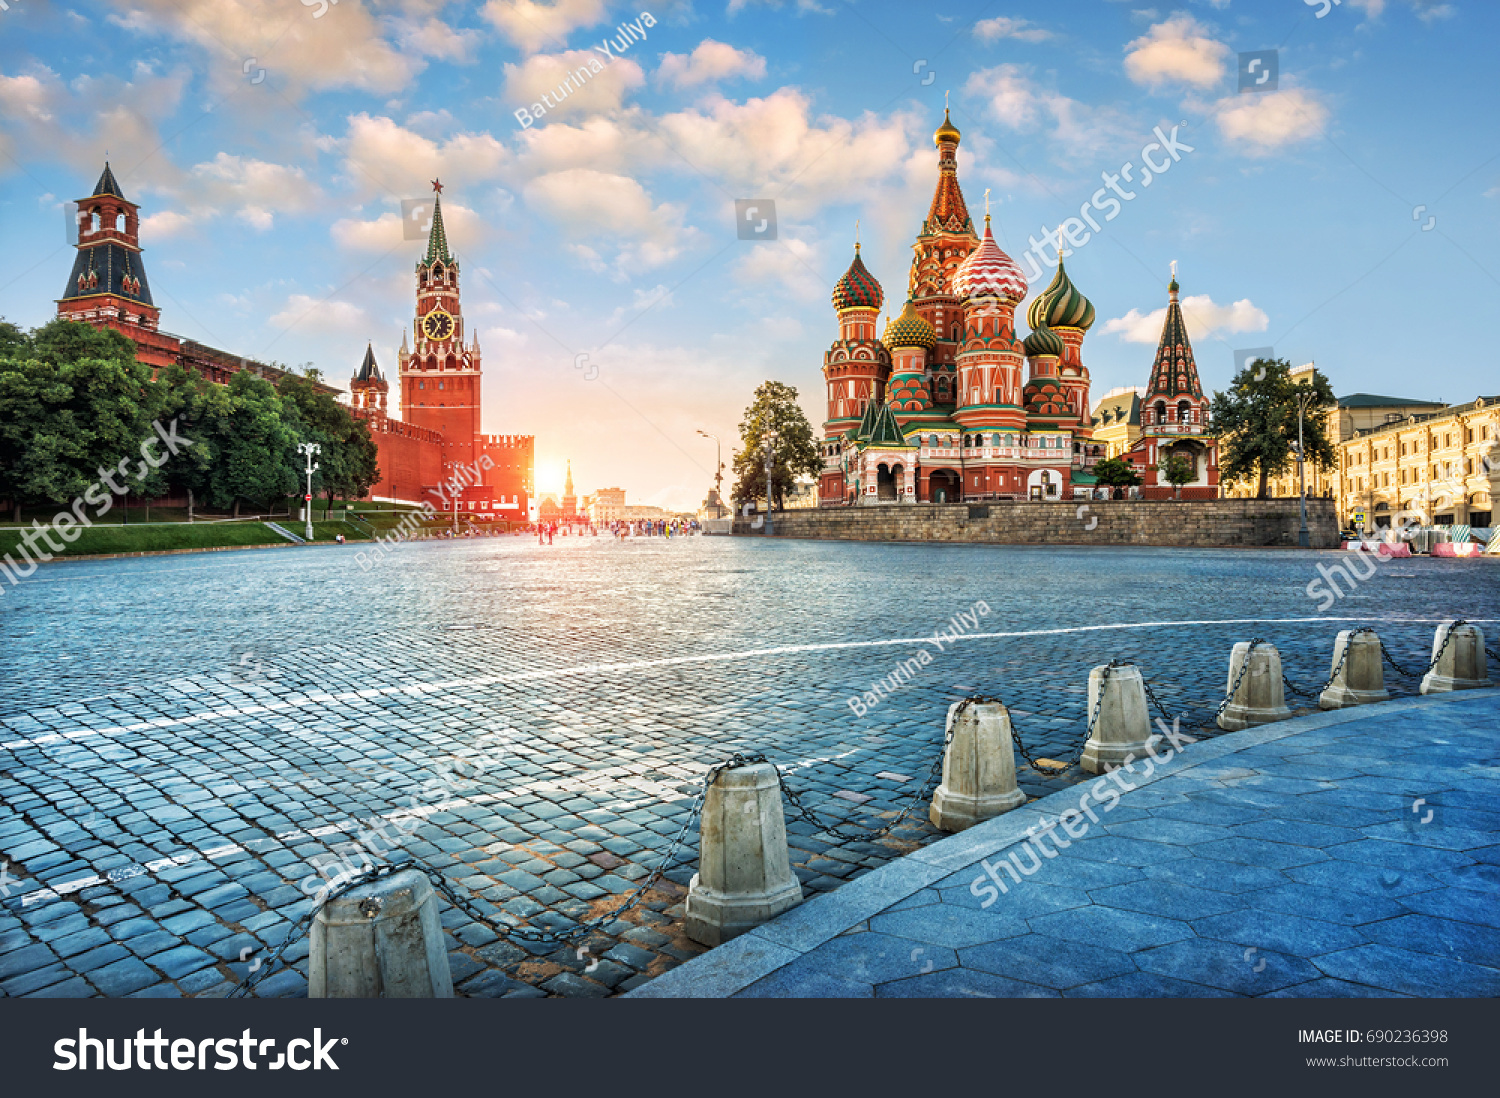 Evening light on Red Square. The St. Basil's Cathedral and the Spassky Tower in the rays of the setting sun. #690236398